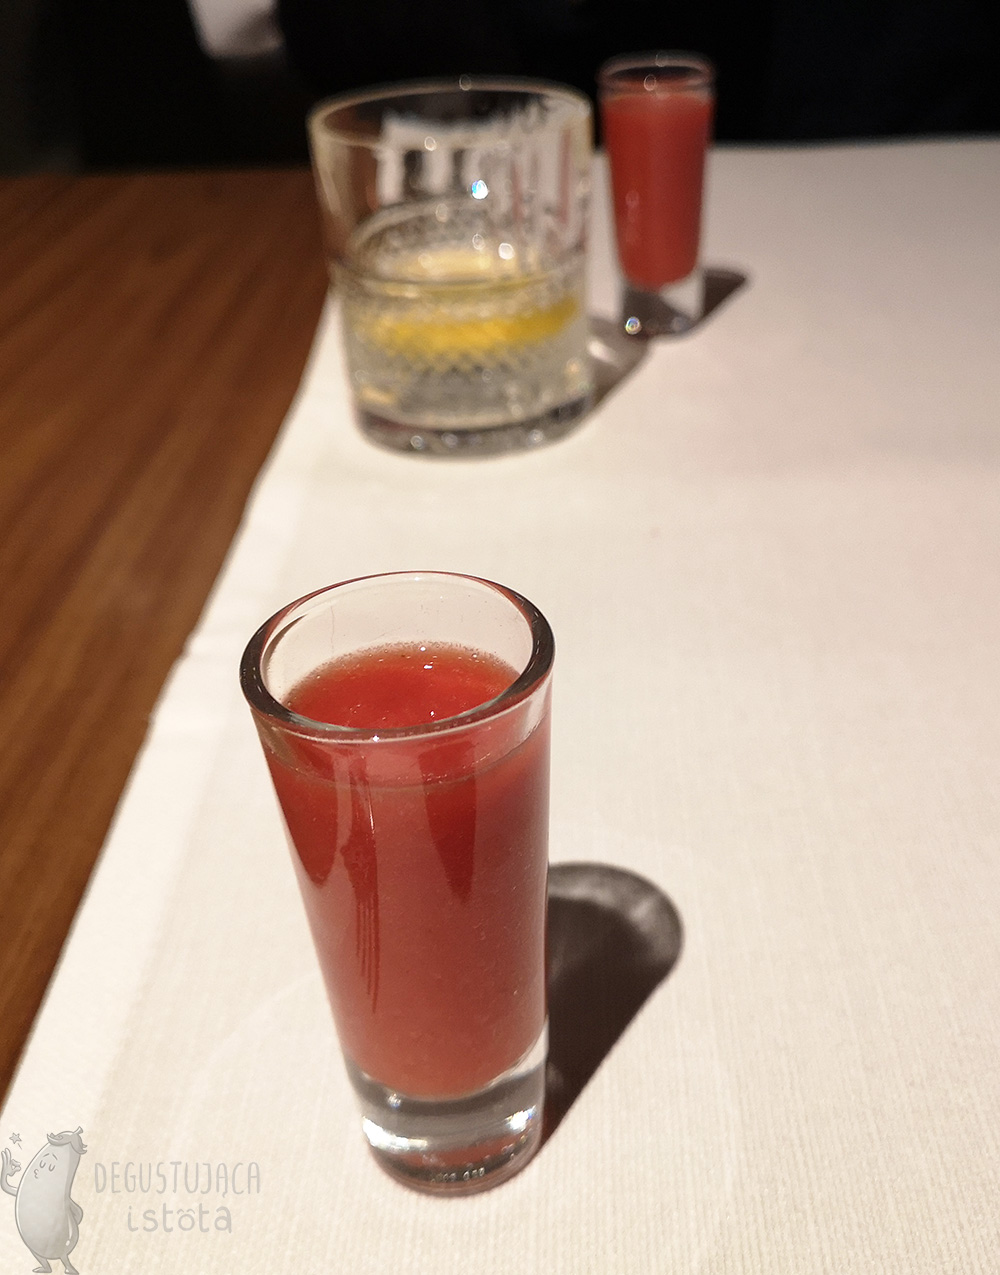 A glass with thick red liquid.